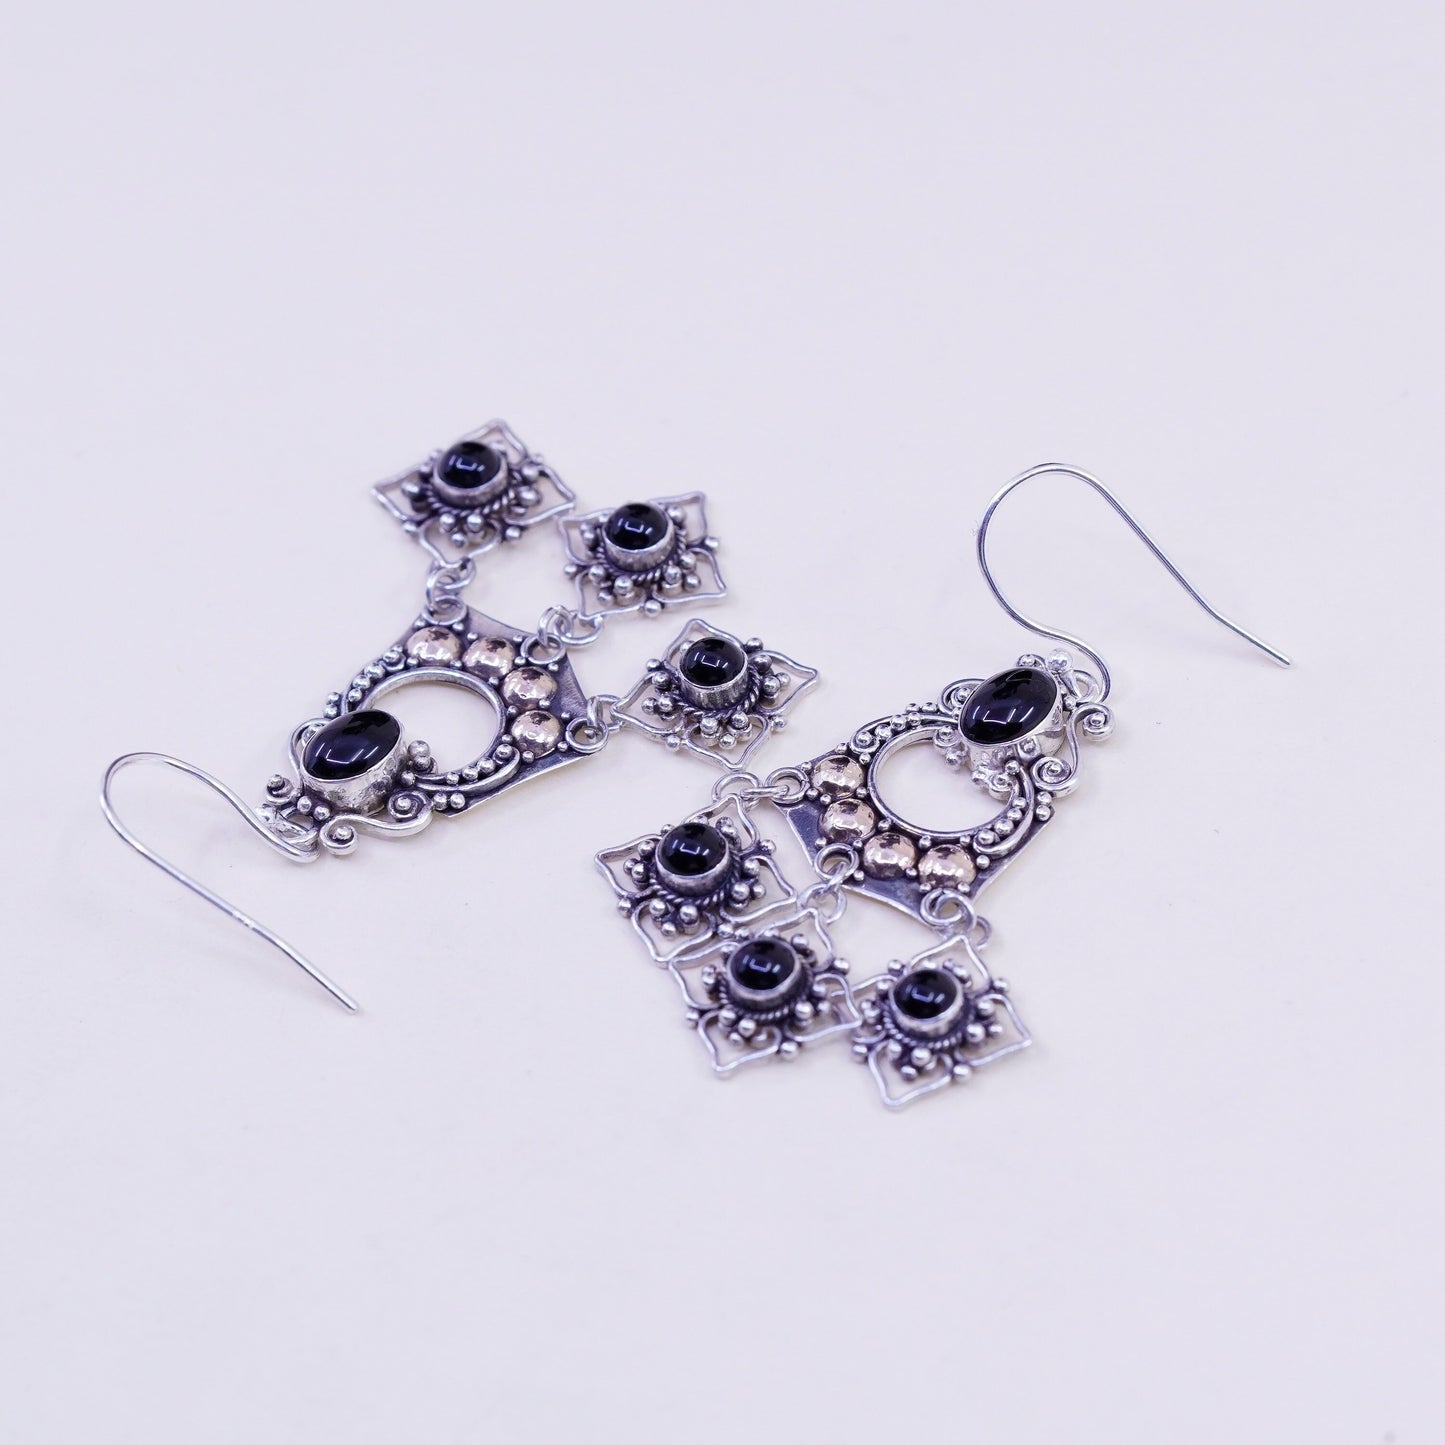 Vintage two tone Sterling 925 silver handmade earrings with obsidian and beads